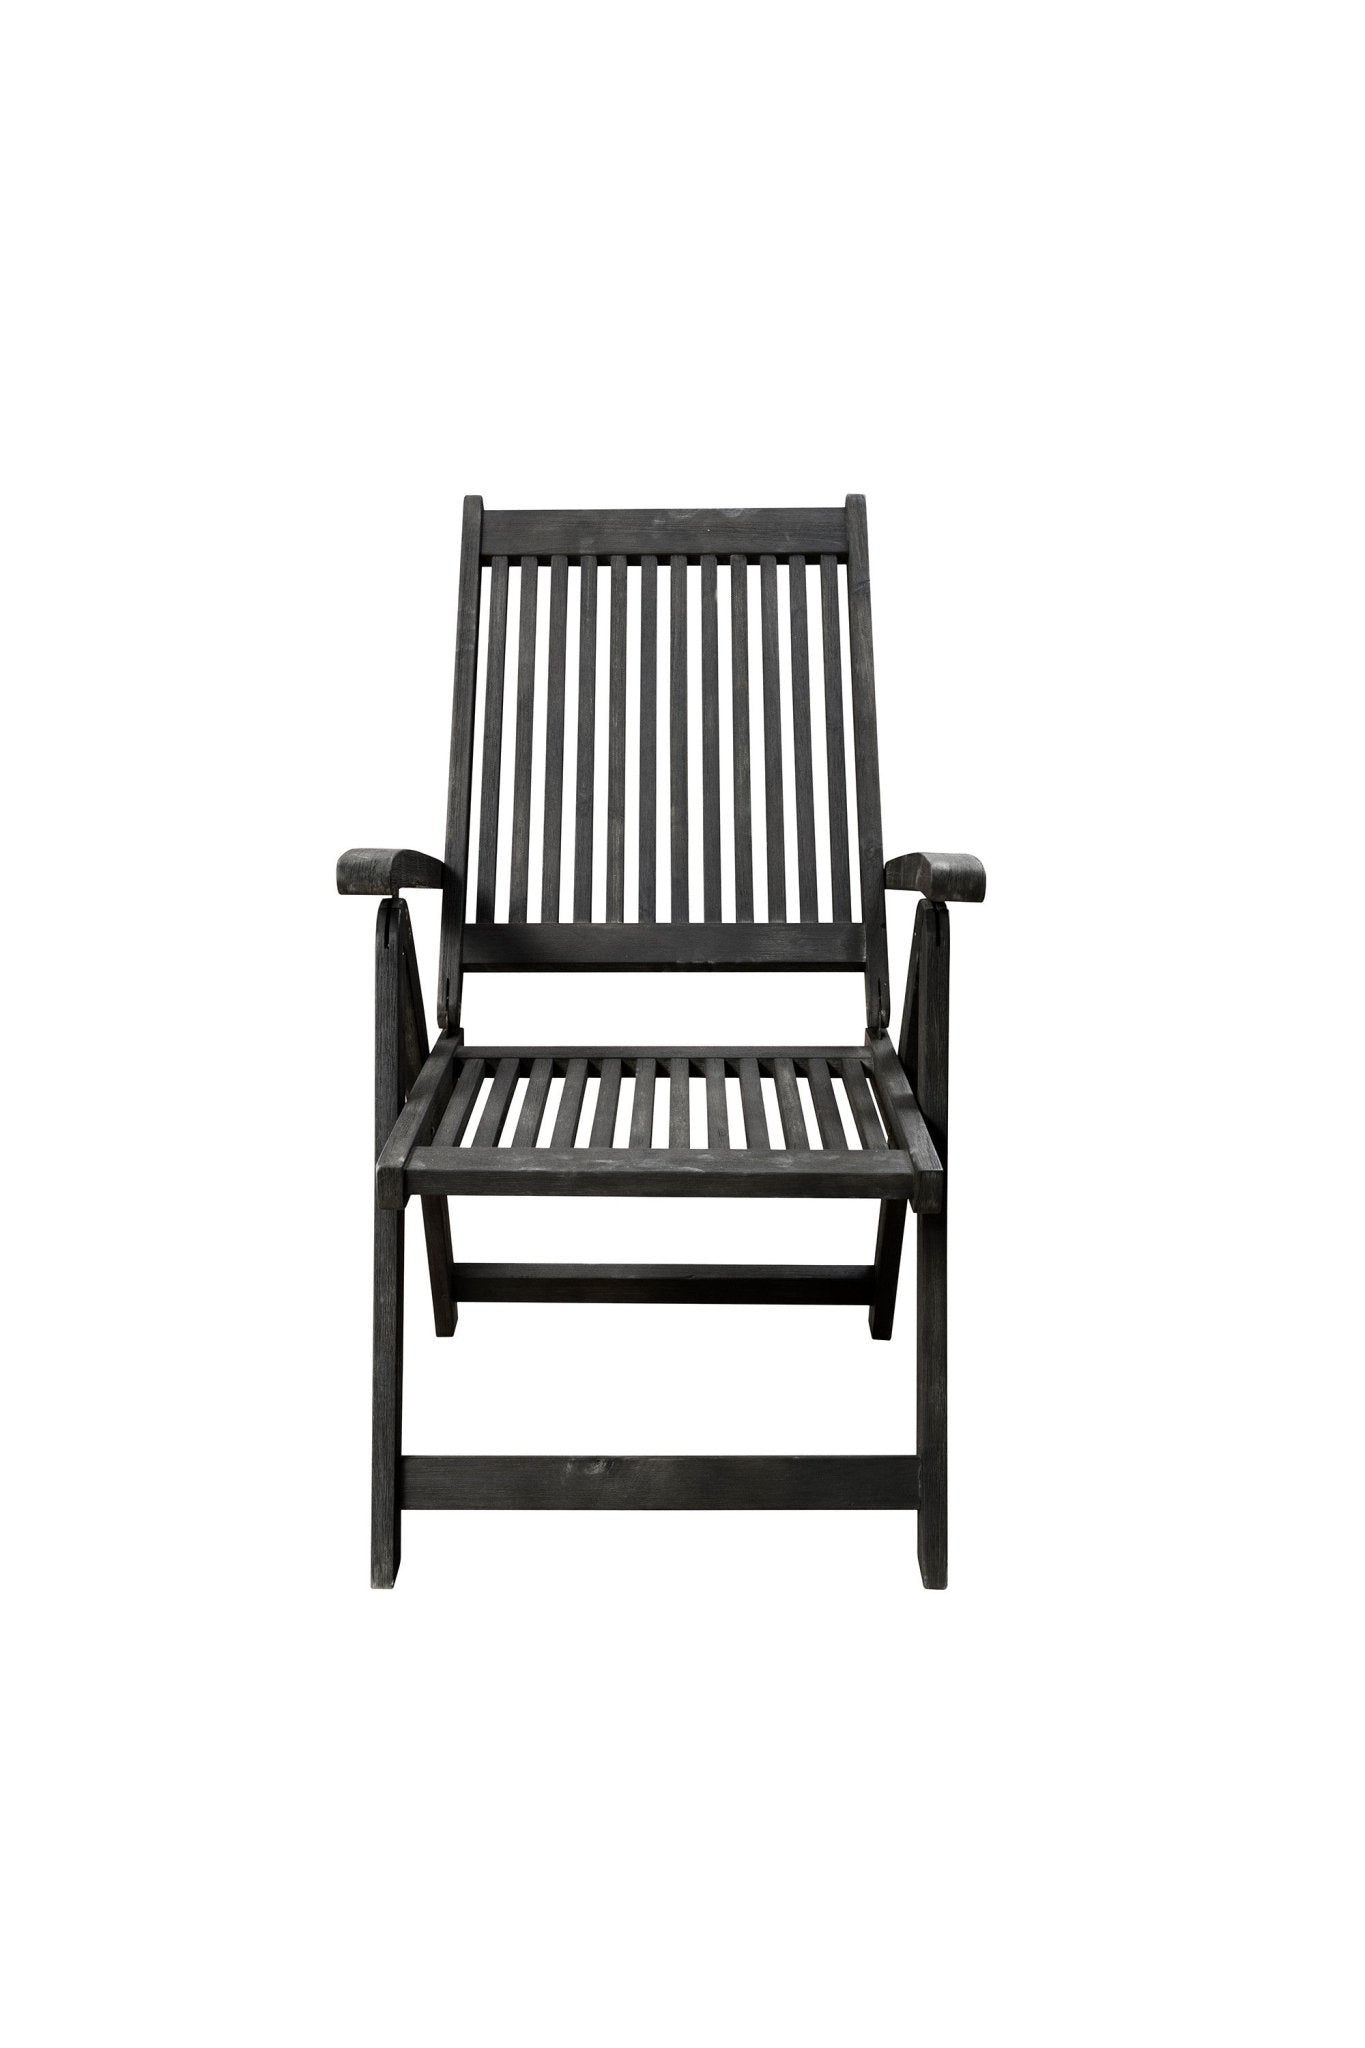 Distressed Outdoor Reclining Chair - Tuesday Morning-Outdoor Chairs